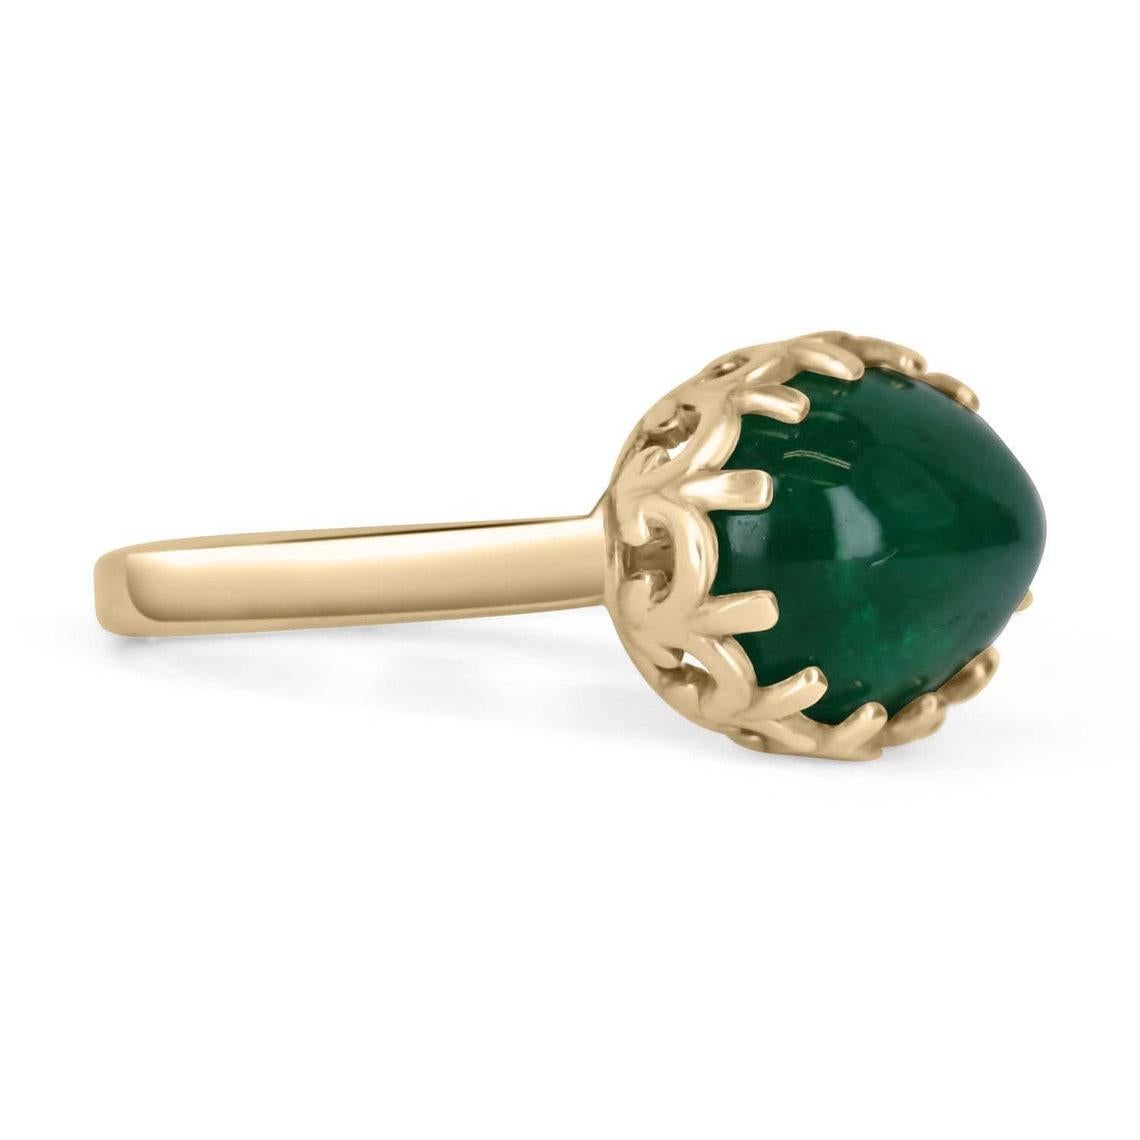 A bezel-set emerald cabochon 14K gold ring. Featured here is this lovely 5.47-carat natural, earth-mined emerald cabochon. This stone displays a gorgeous, dark green color, and very good luster. This natural beauty is set in a 14K yellow gold bezel